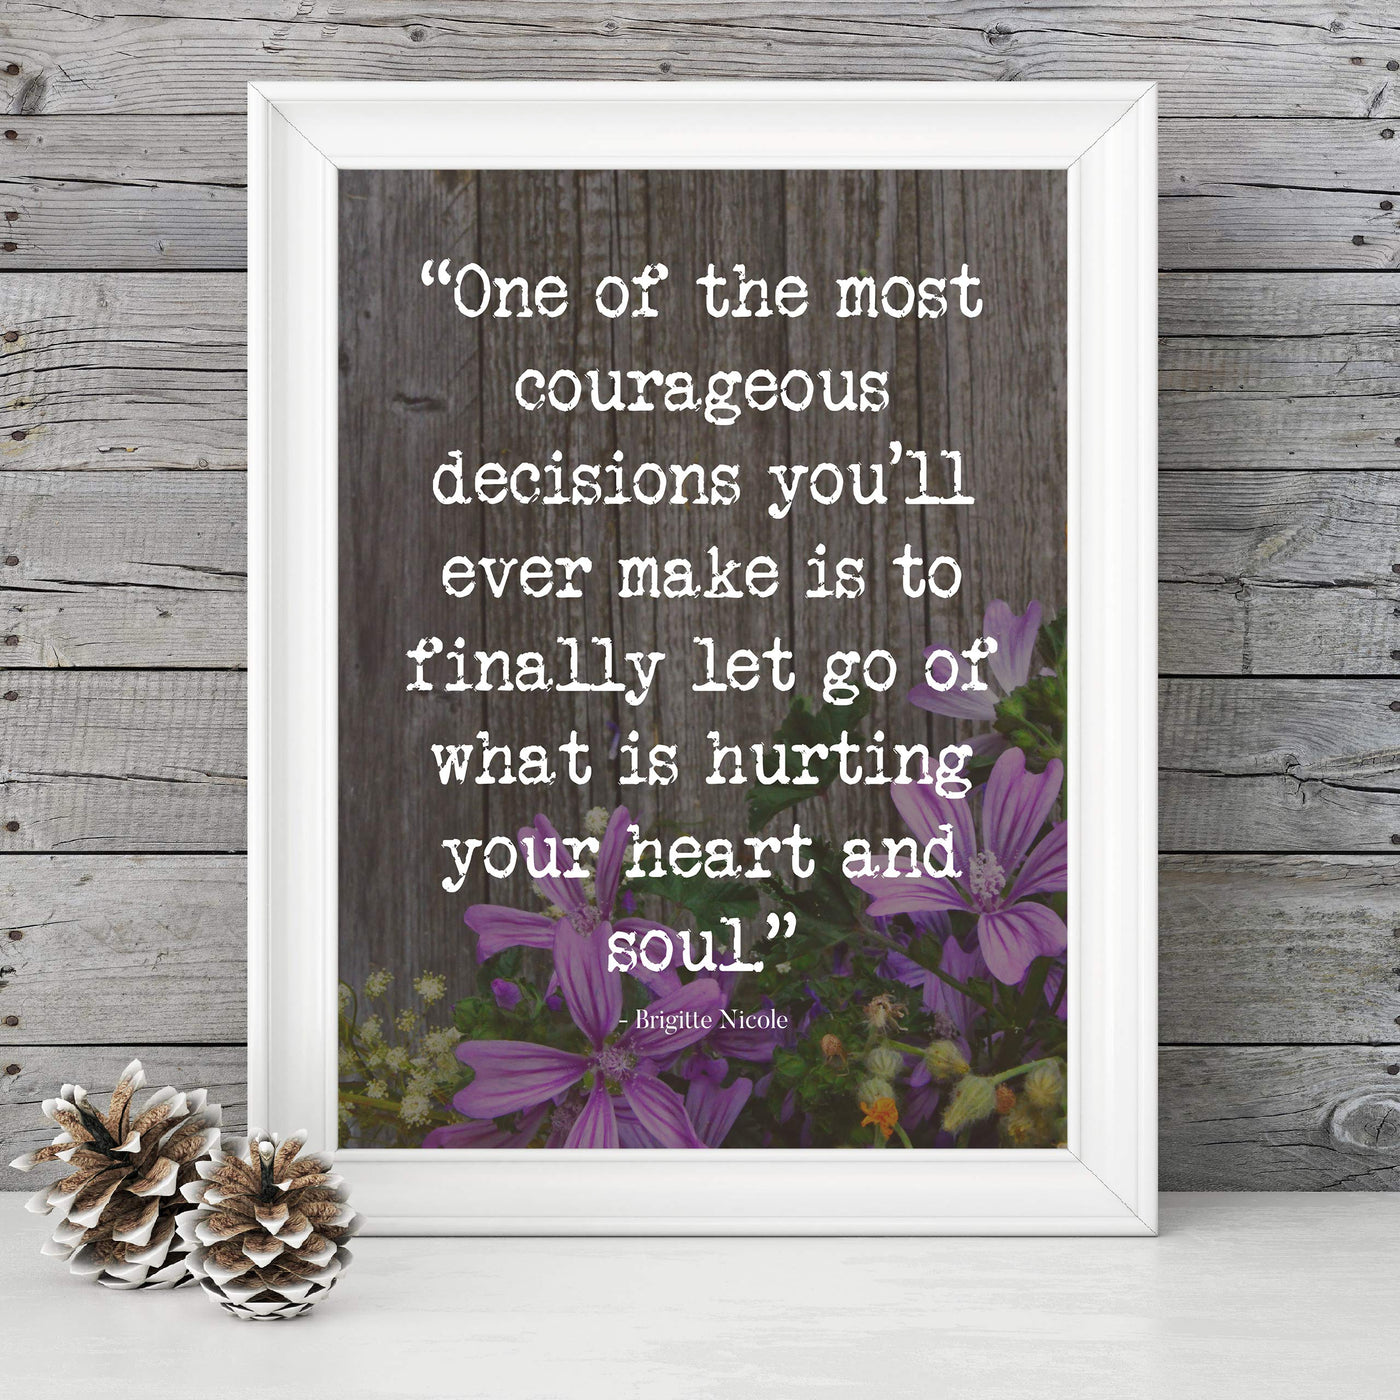 One of the Most Courageous Decisions-Brigitte Nicole-Inspirational Quotes Wall Print -8 x 10" Floral Wall Art-Ready to Frame. Modern Home-Office-School Decor. Positive Message For Everyone!